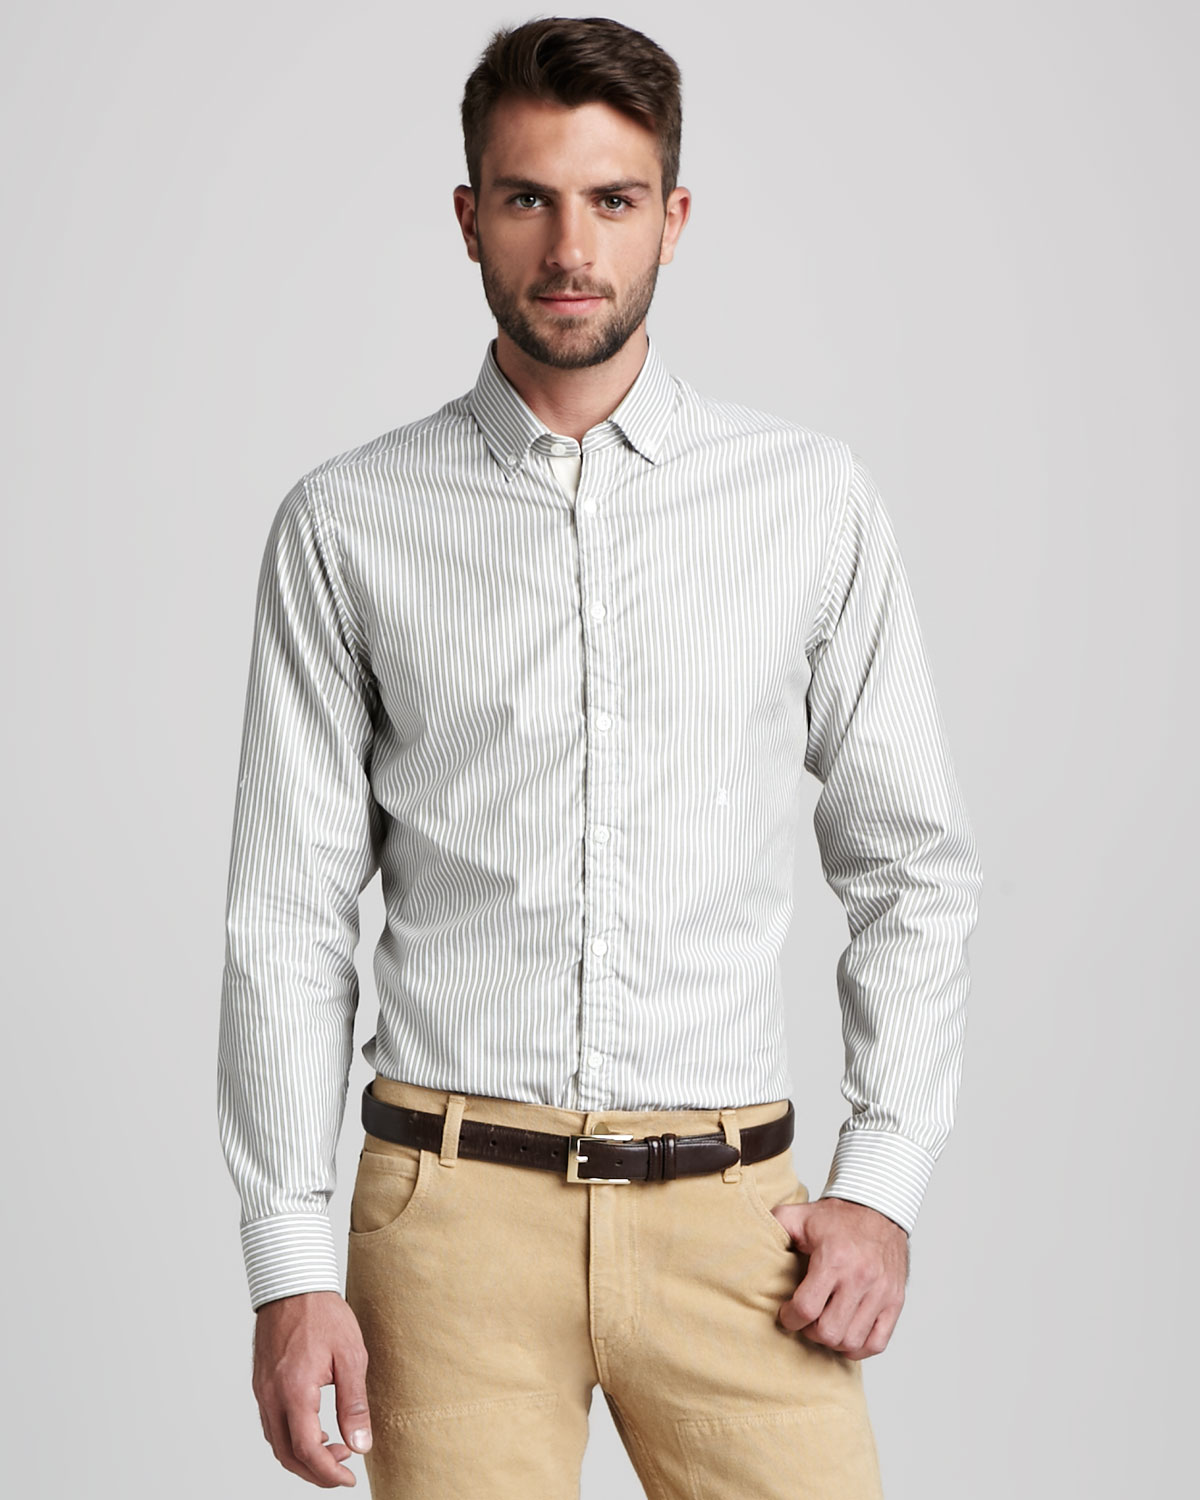 Oxford shirts for men